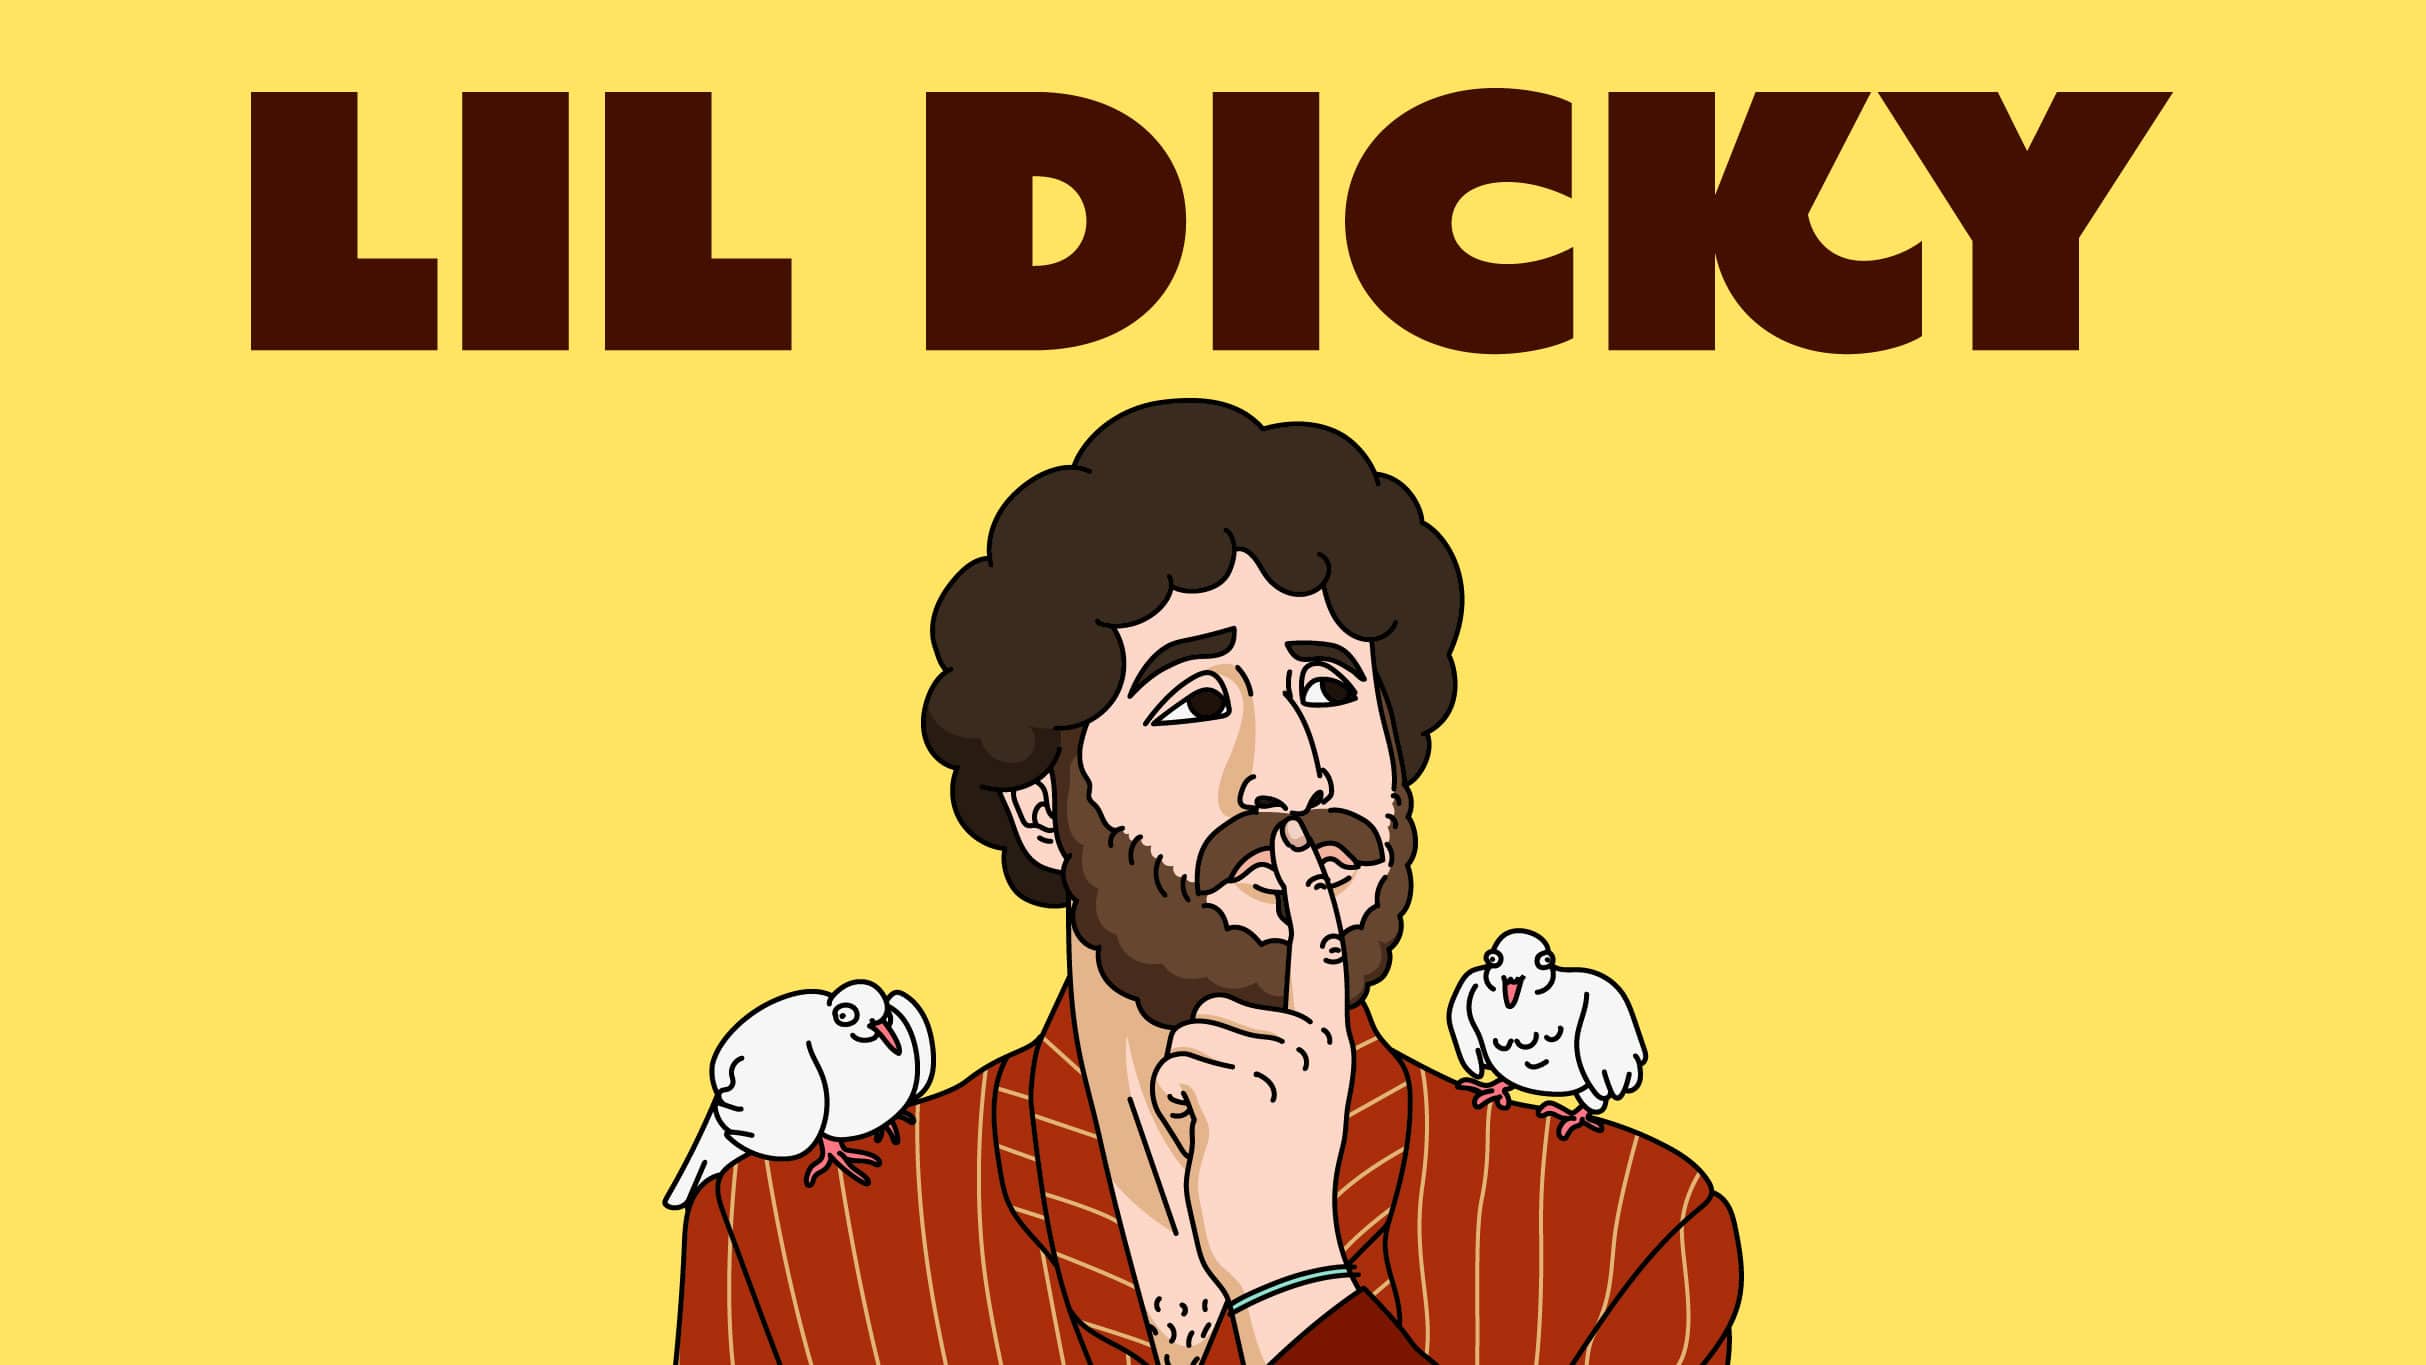 Lil Dicky. Lil Dicky feat Snoop Dogg. Little dick. Hey little dick заставка. Lil dick